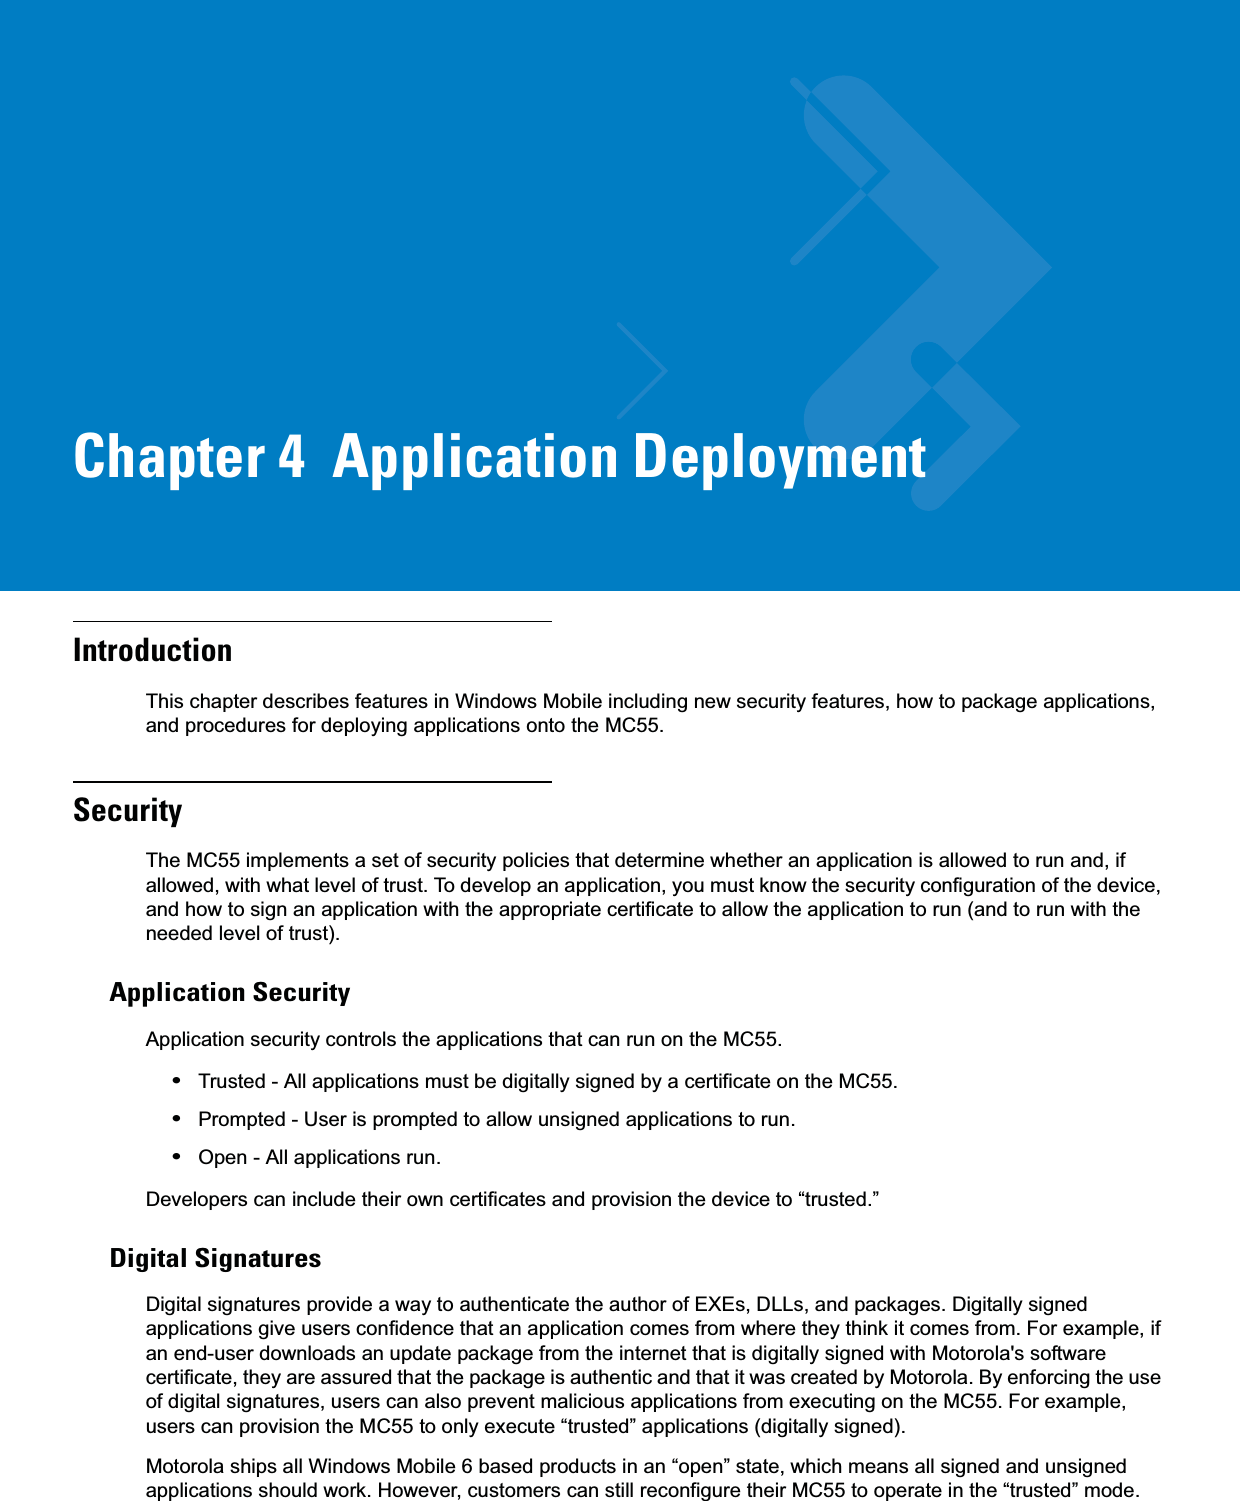 Chapter 4  Application DeploymentIntroductionThis chapter describes features in Windows Mobile including new security features, how to package applications, and procedures for deploying applications onto the MC55.SecurityThe MC55 implements a set of security policies that determine whether an application is allowed to run and, if allowed, with what level of trust. To develop an application, you must know the security configuration of the device, and how to sign an application with the appropriate certificate to allow the application to run (and to run with the needed level of trust).Application SecurityApplication security controls the applications that can run on the MC55.•Trusted - All applications must be digitally signed by a certificate on the MC55.•Prompted - User is prompted to allow unsigned applications to run.•Open - All applications run.Developers can include their own certificates and provision the device to “trusted.”Digital SignaturesDigital signatures provide a way to authenticate the author of EXEs, DLLs, and packages. Digitally signed applications give users confidence that an application comes from where they think it comes from. For example, if an end-user downloads an update package from the internet that is digitally signed with Motorola&apos;s software certificate, they are assured that the package is authentic and that it was created by Motorola. By enforcing the use of digital signatures, users can also prevent malicious applications from executing on the MC55. For example, users can provision the MC55 to only execute “trusted” applications (digitally signed).Motorola ships all Windows Mobile 6 based products in an “open” state, which means all signed and unsigned applications should work. However, customers can still reconfigure their MC55 to operate in the “trusted” mode. 